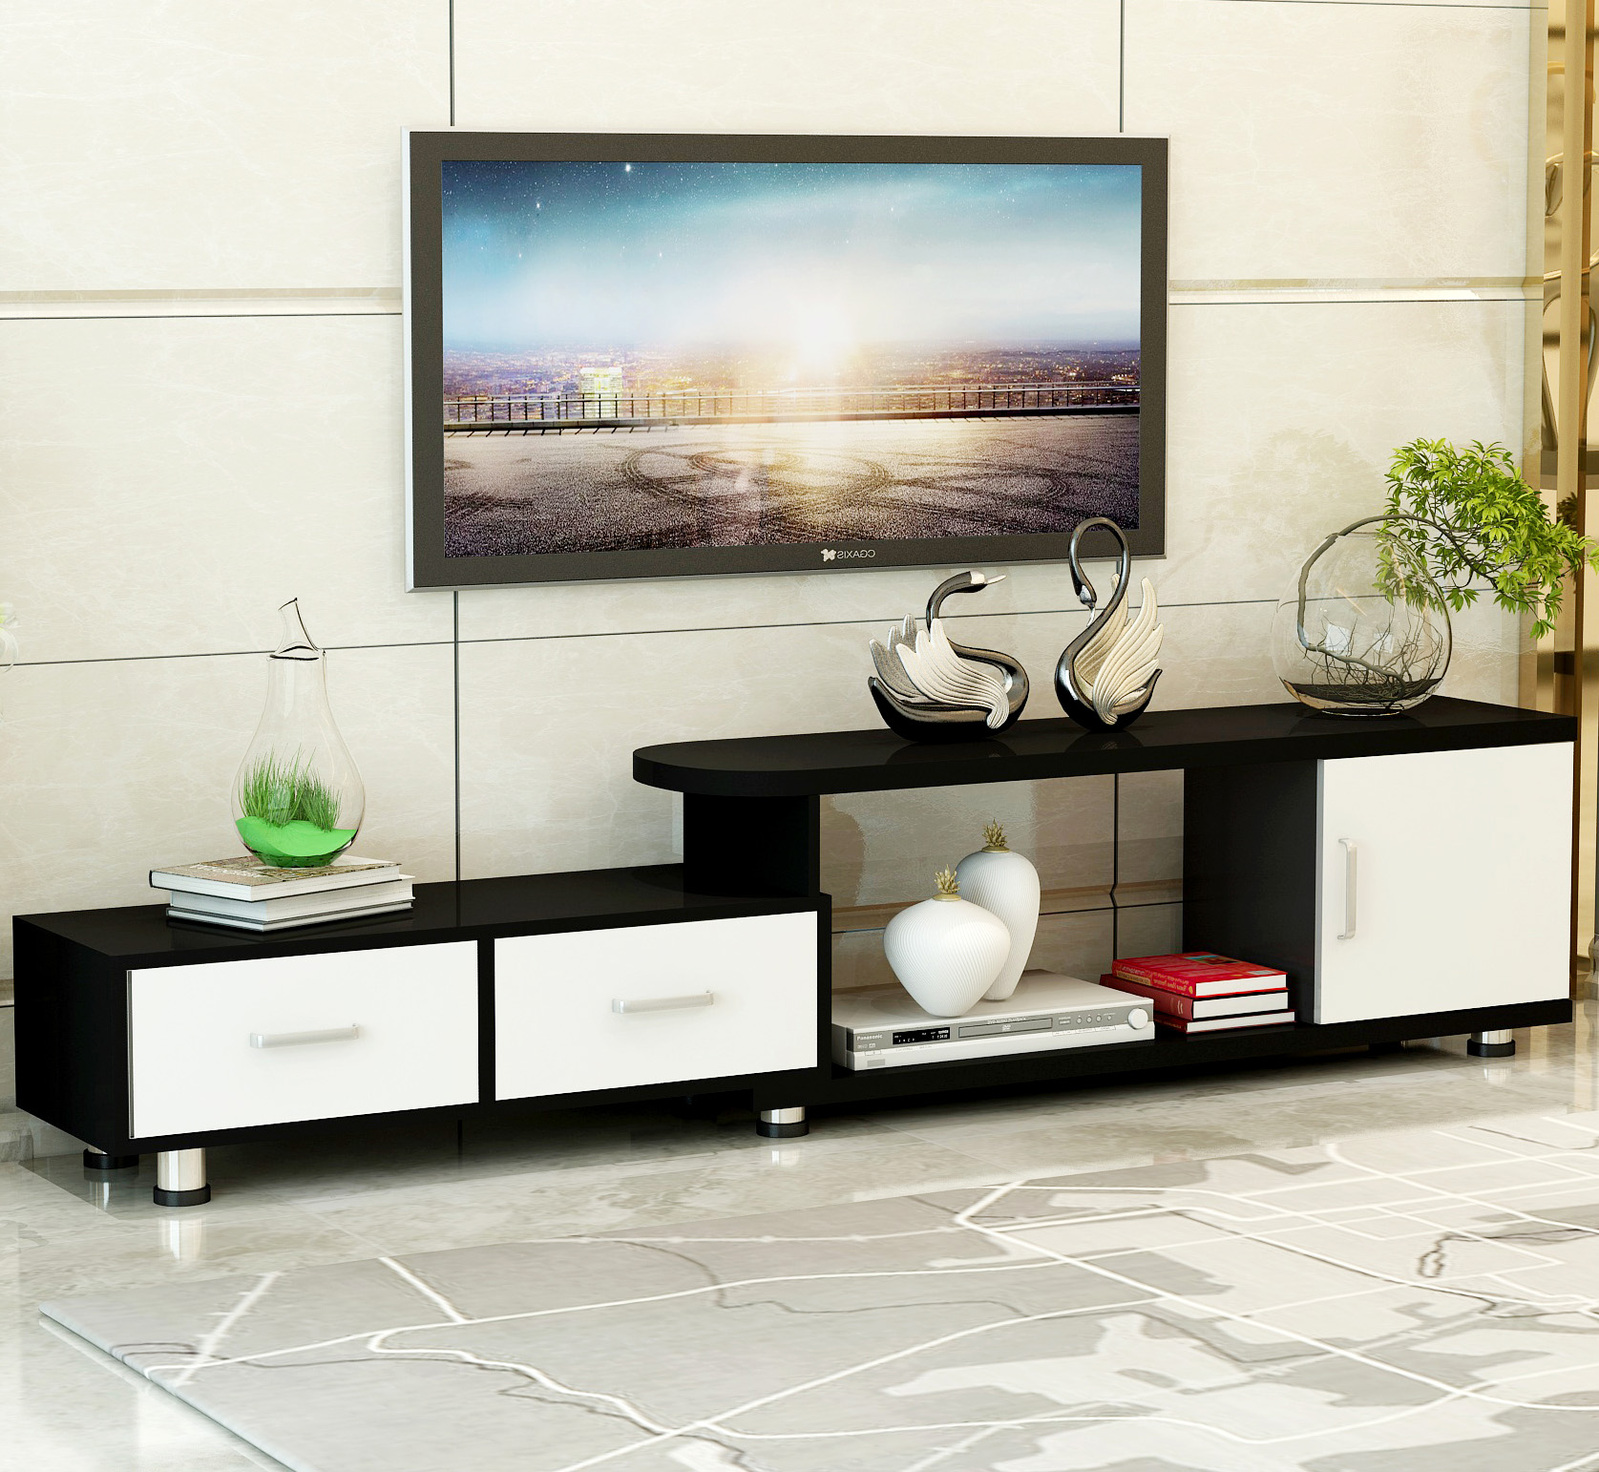 Luxe Adjustable Extendable TV Cabinet (Black & White)